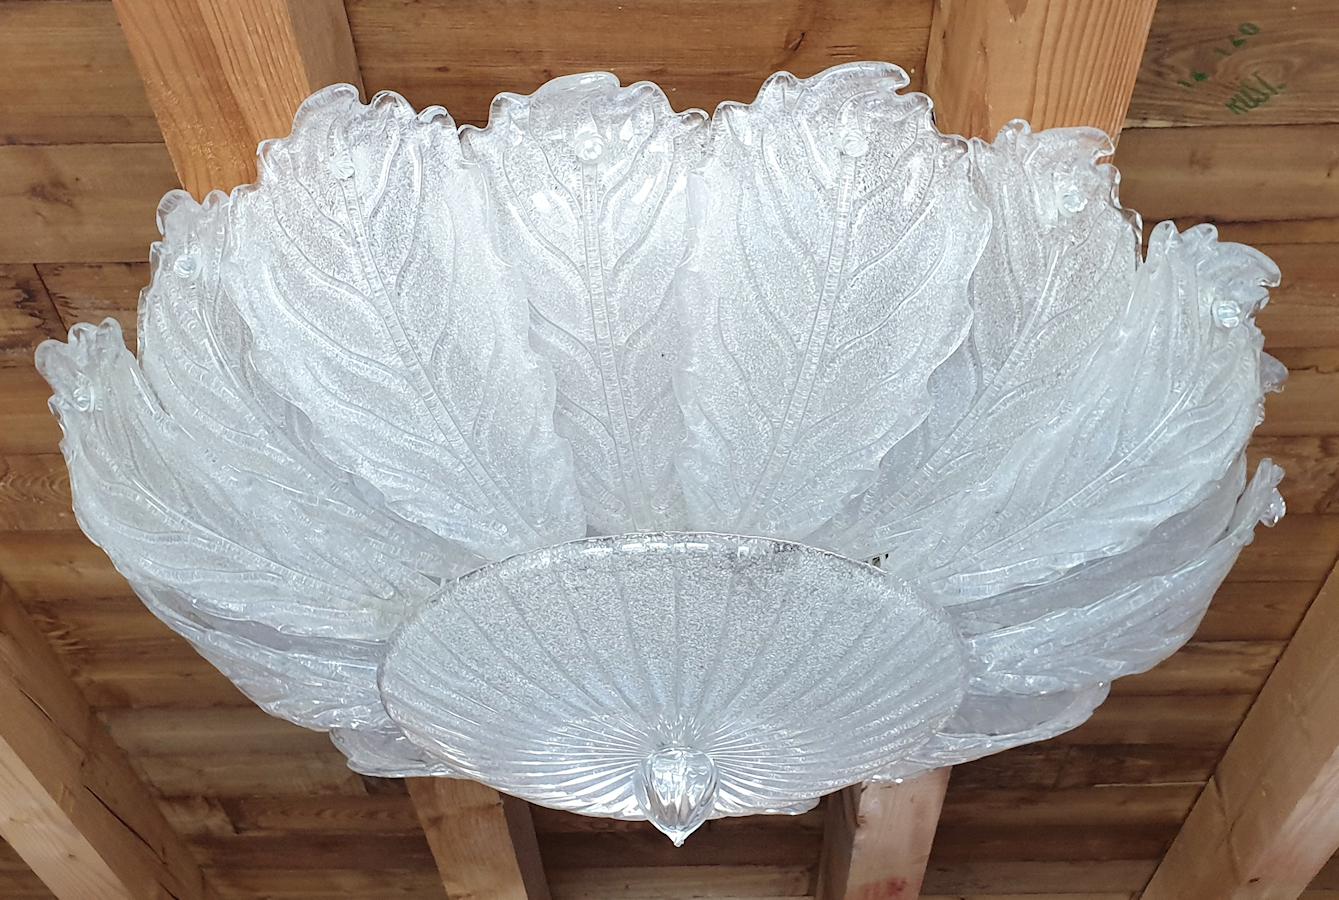 Very large Mid-Century Modern clear and translucent leaves Murano glass flush mount chandelier, by Barovier & Toso, Italy, 1970s.
8 lights, rewired for the US.
Frame in painted metal.
Excellent condition of the glass, some signs of wear on the